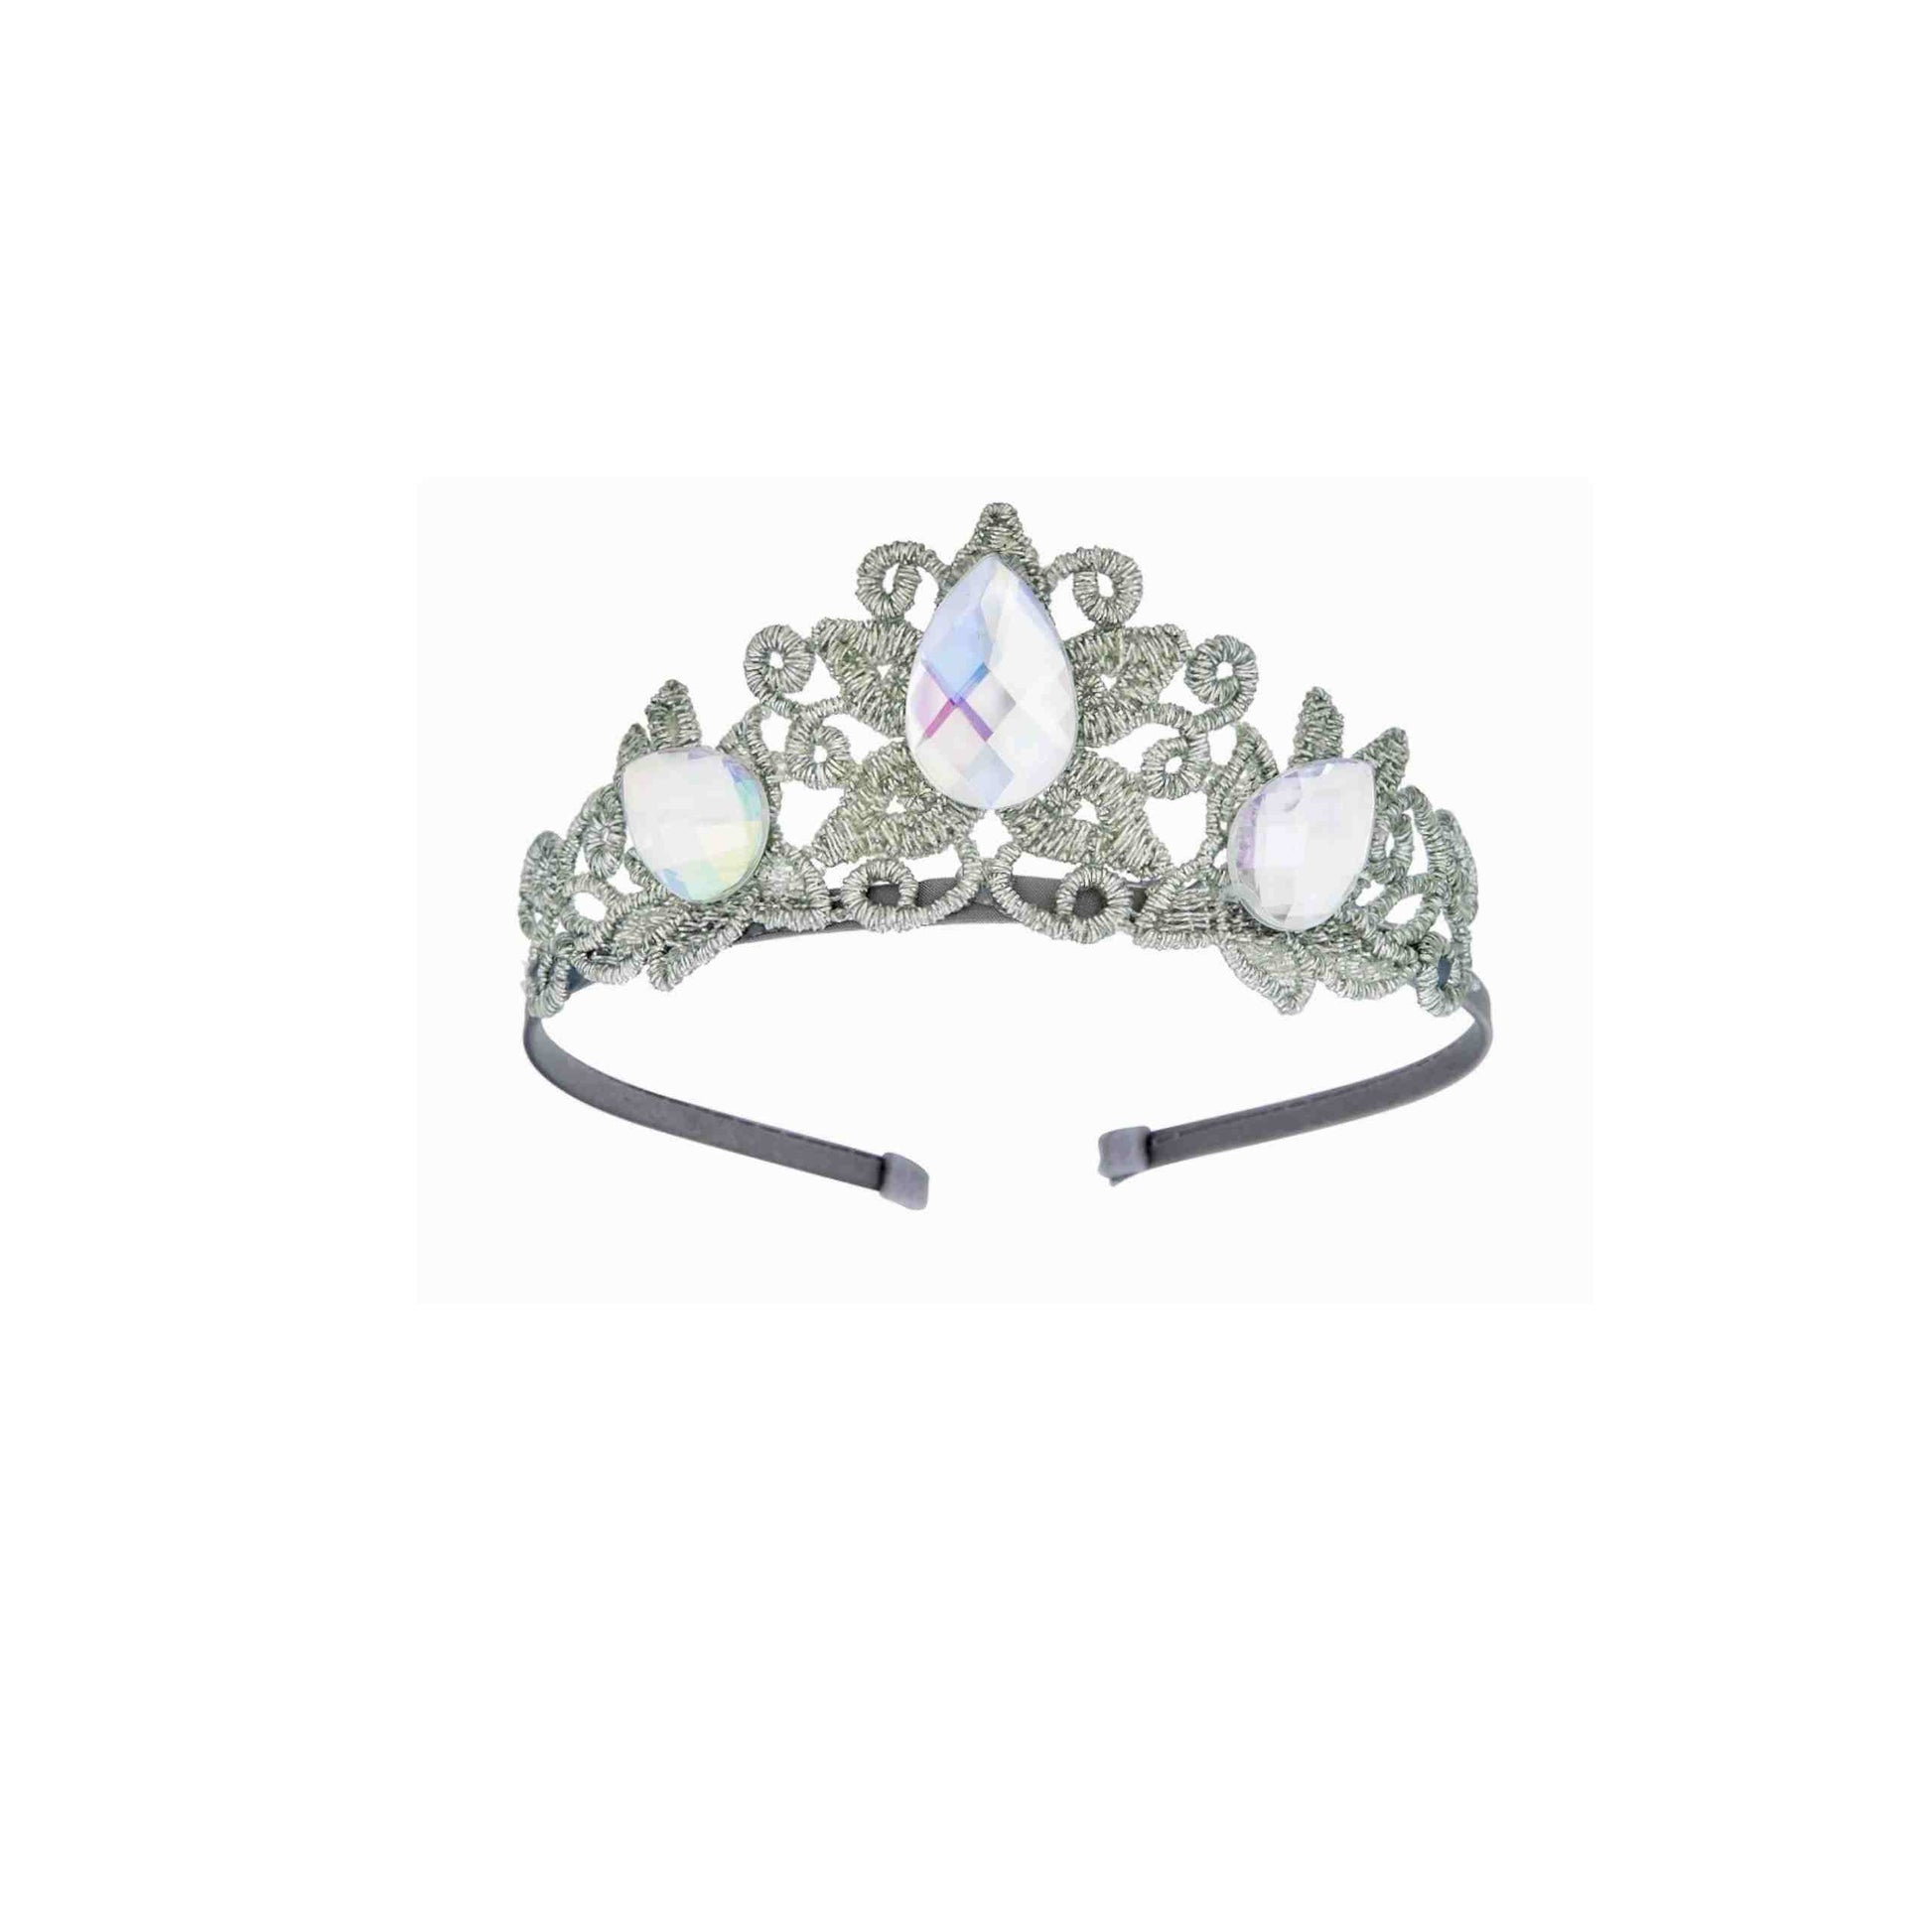 a tiara with a white mother of pearl in the center